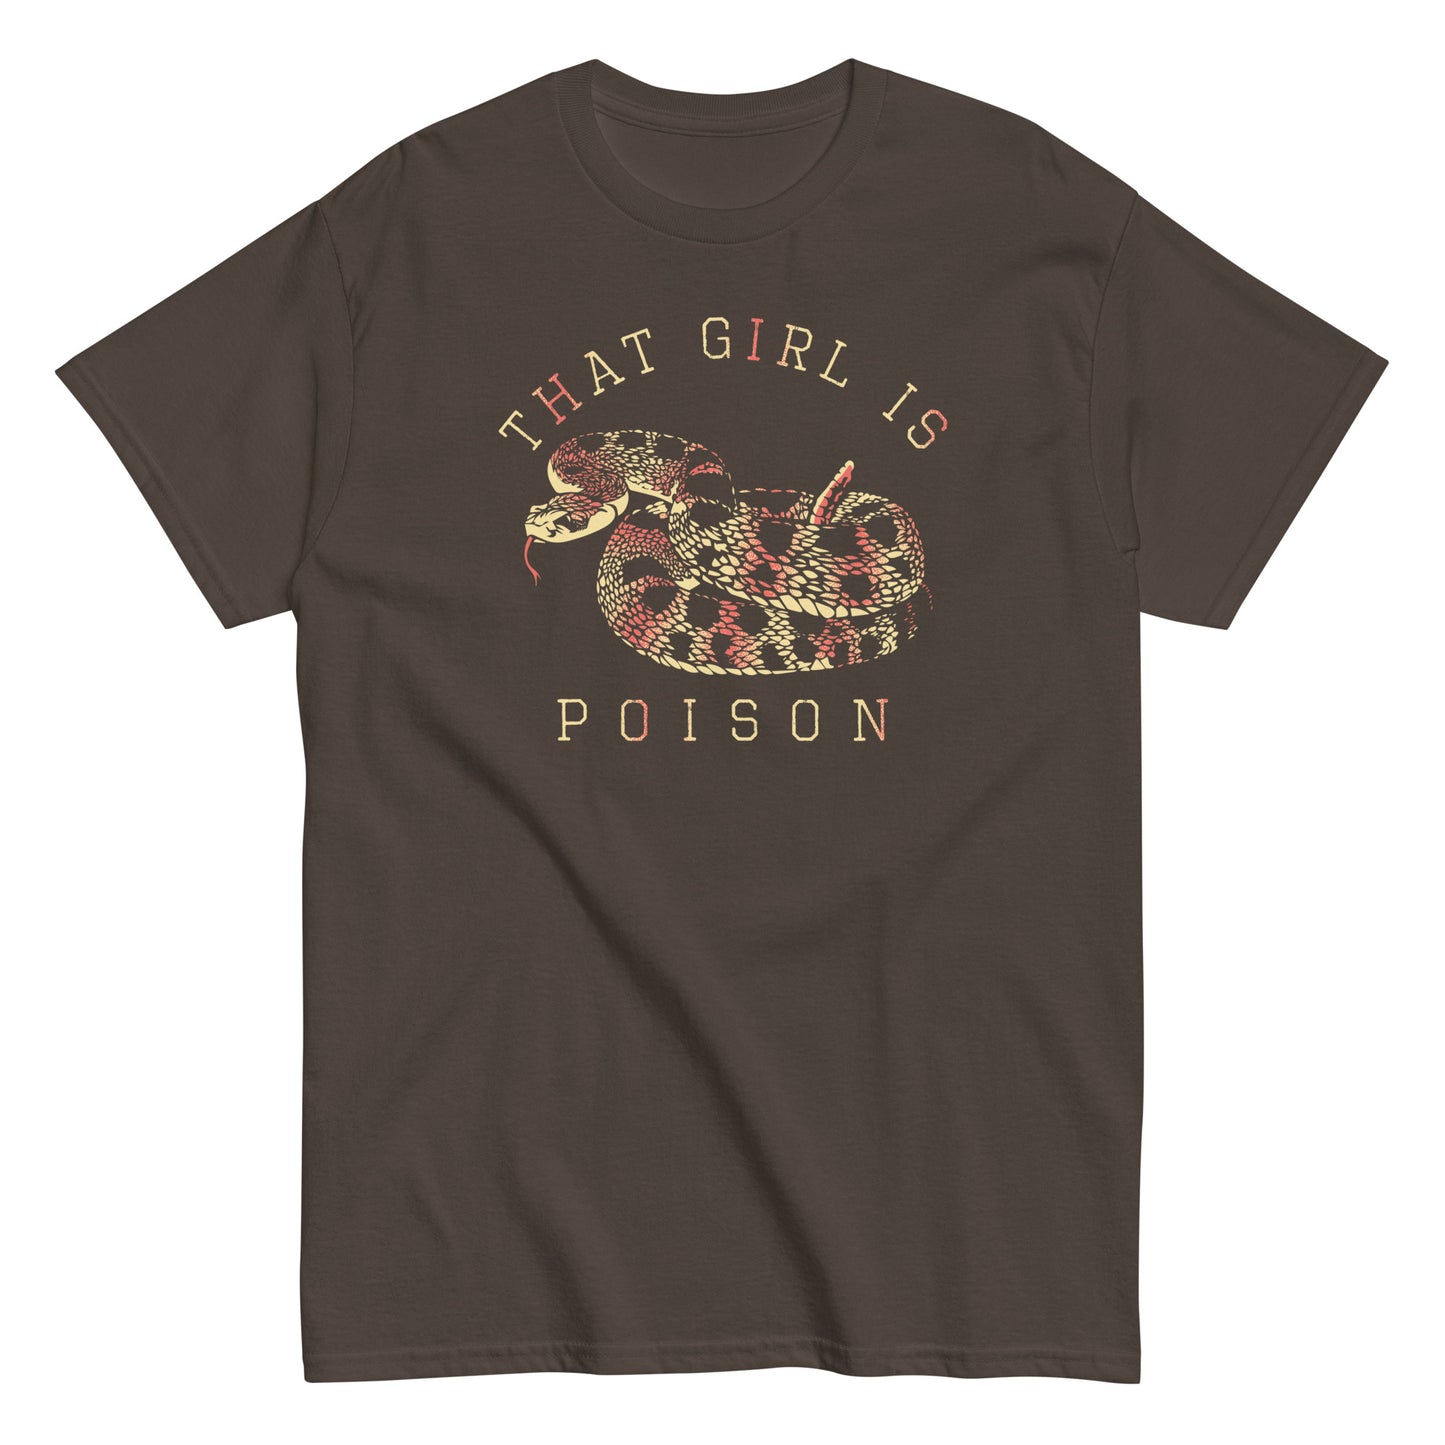 That Girl Is Poison Men's Classic Tee